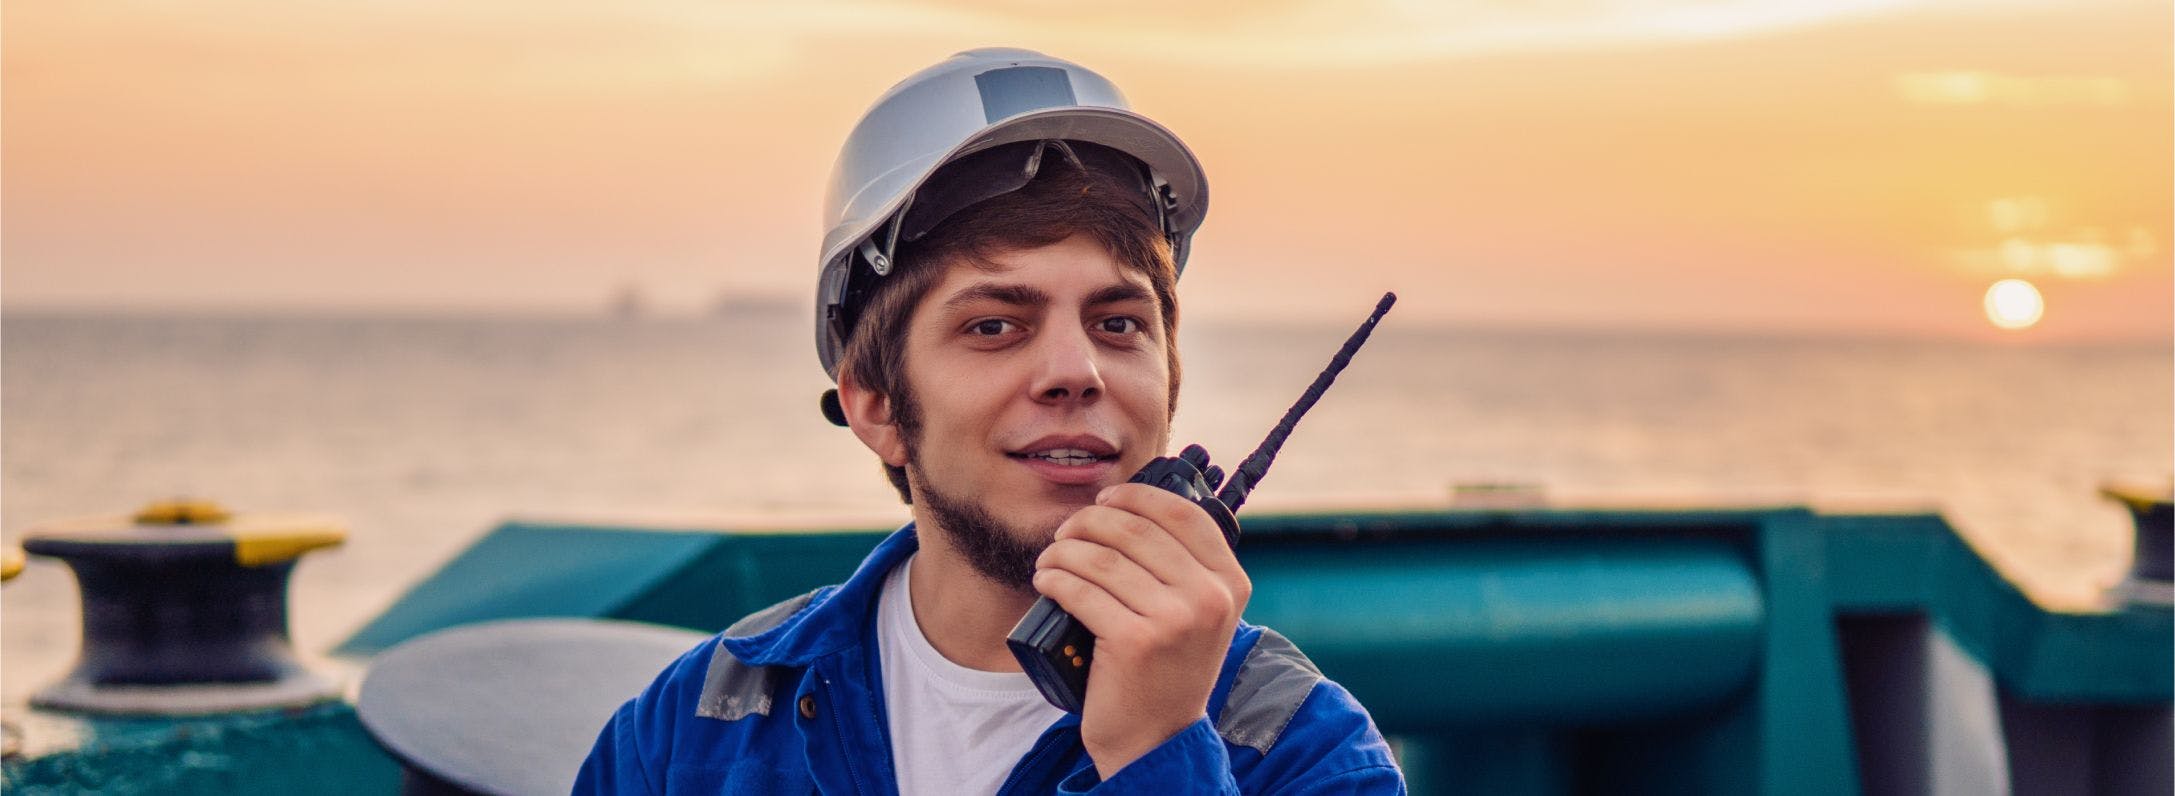 Able Seaman working offshore